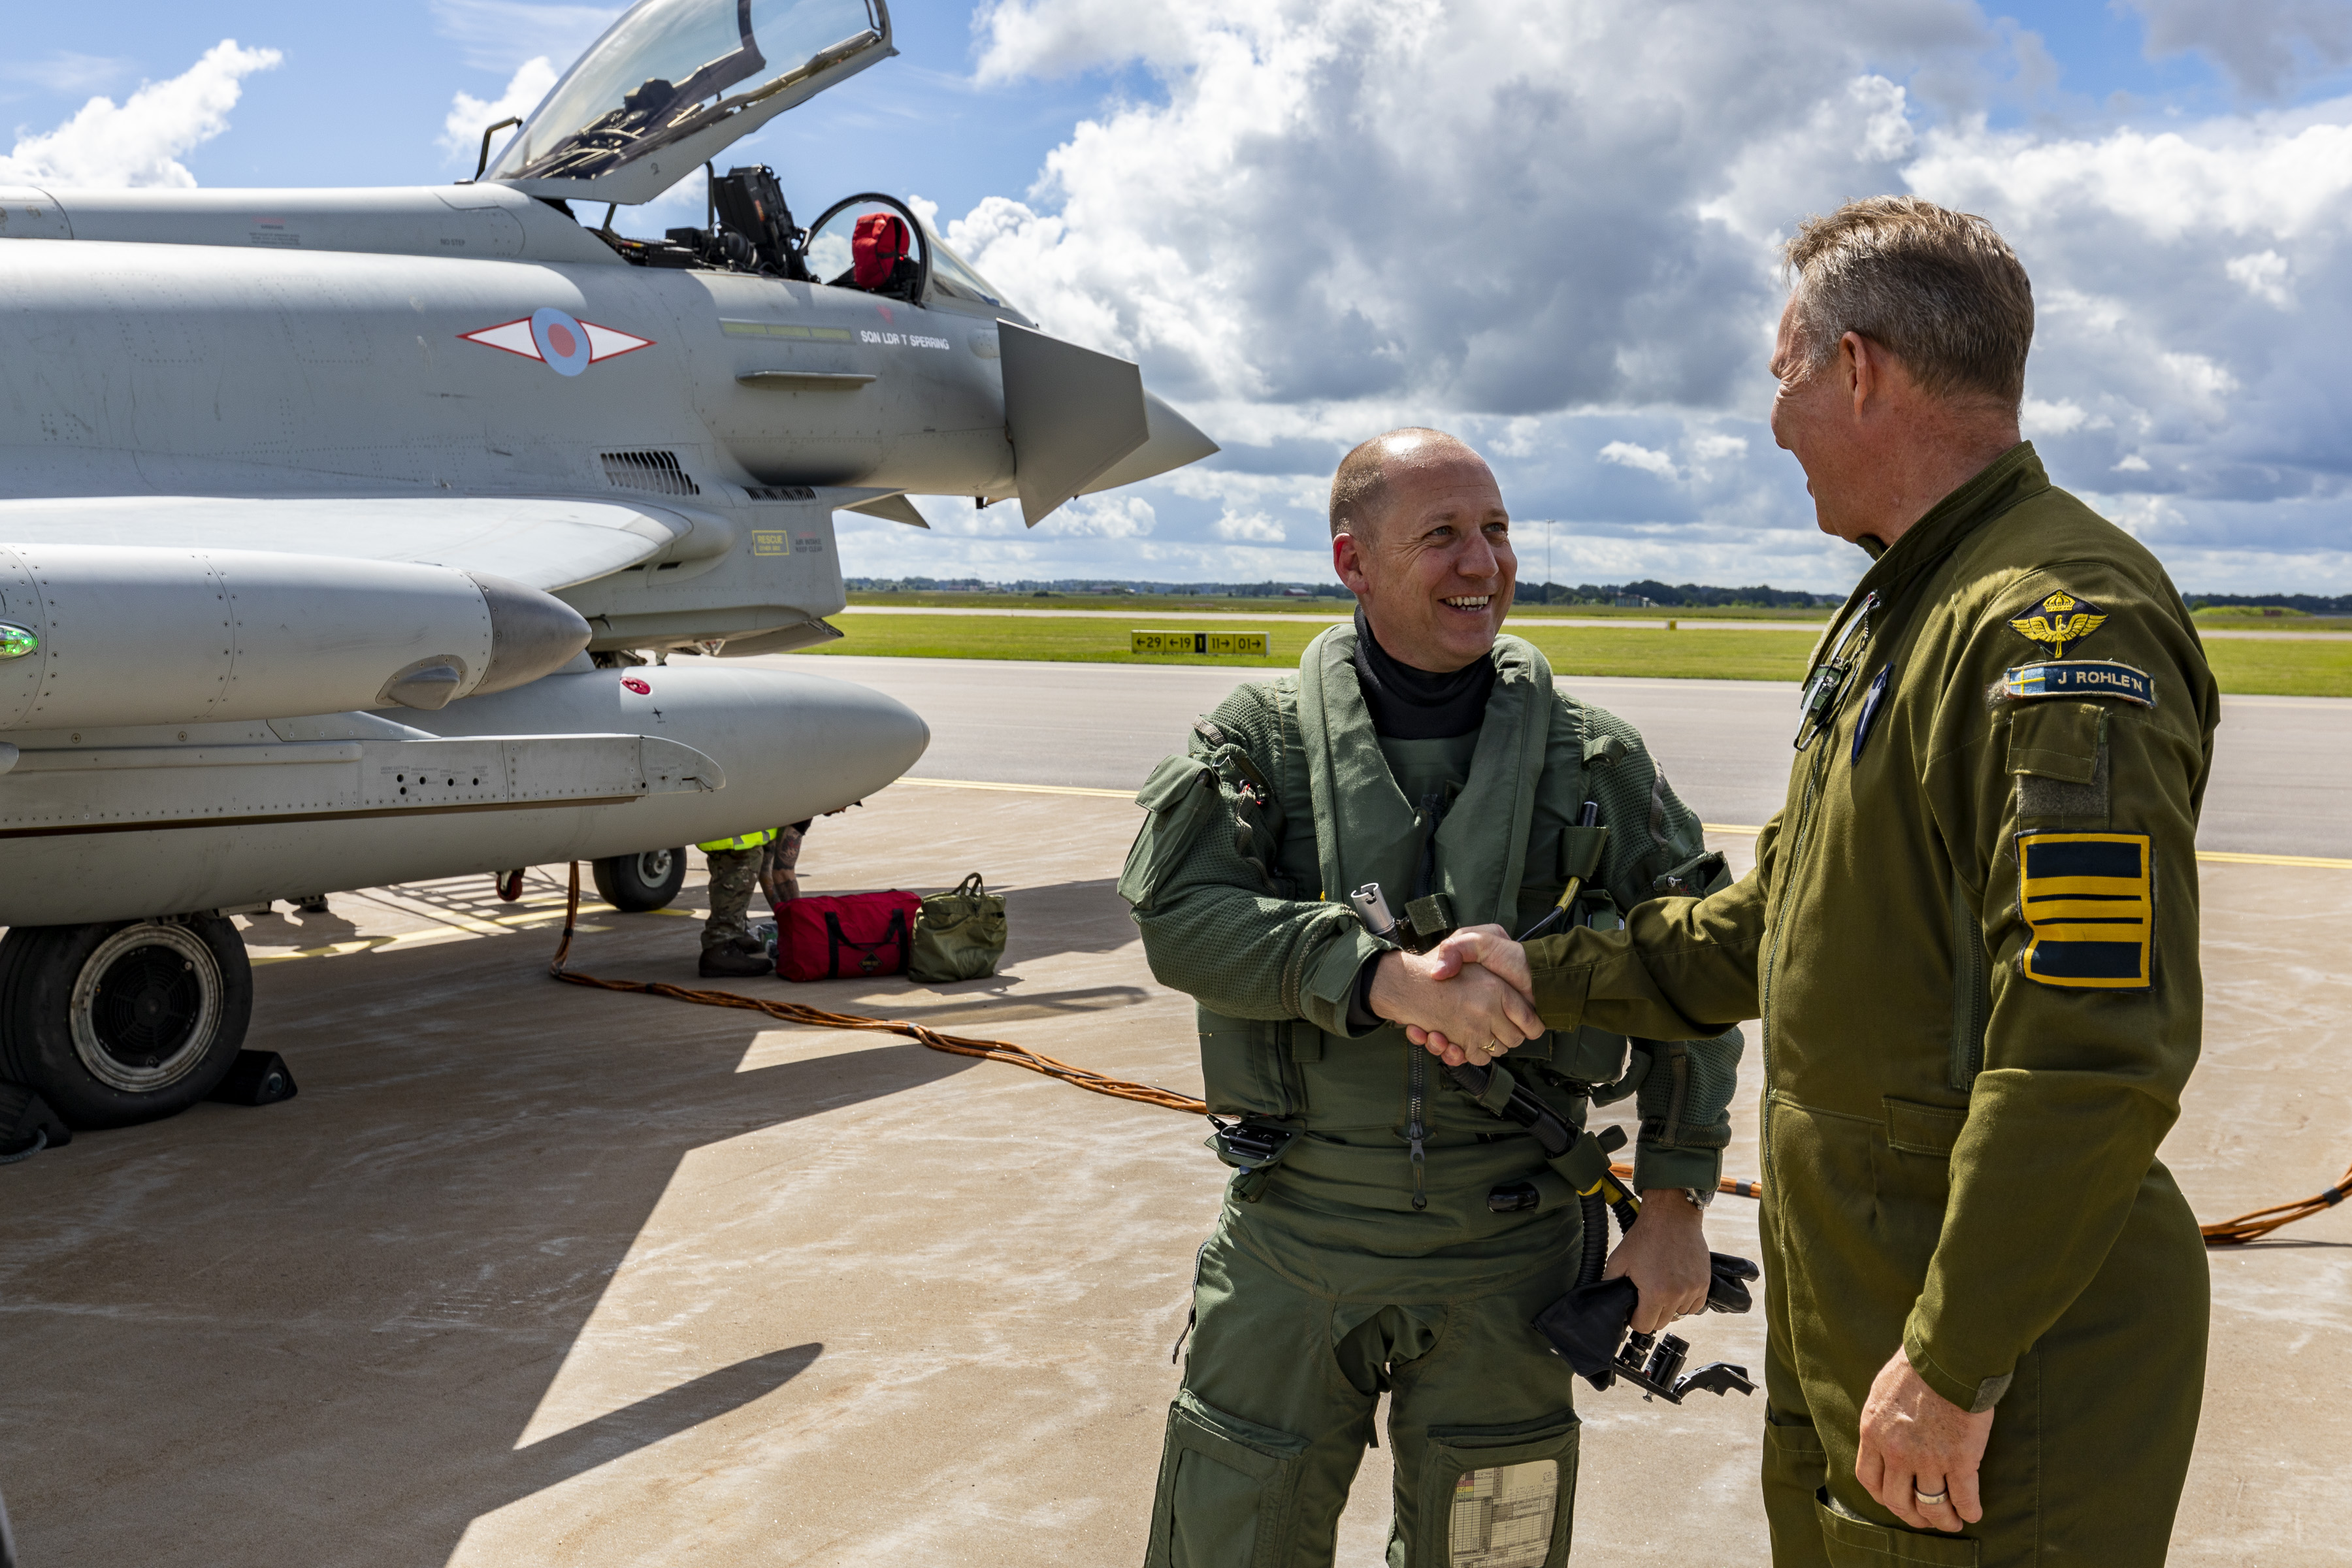 RAF and SwAF pilots shaking hands in front of a Typhoon aircraft